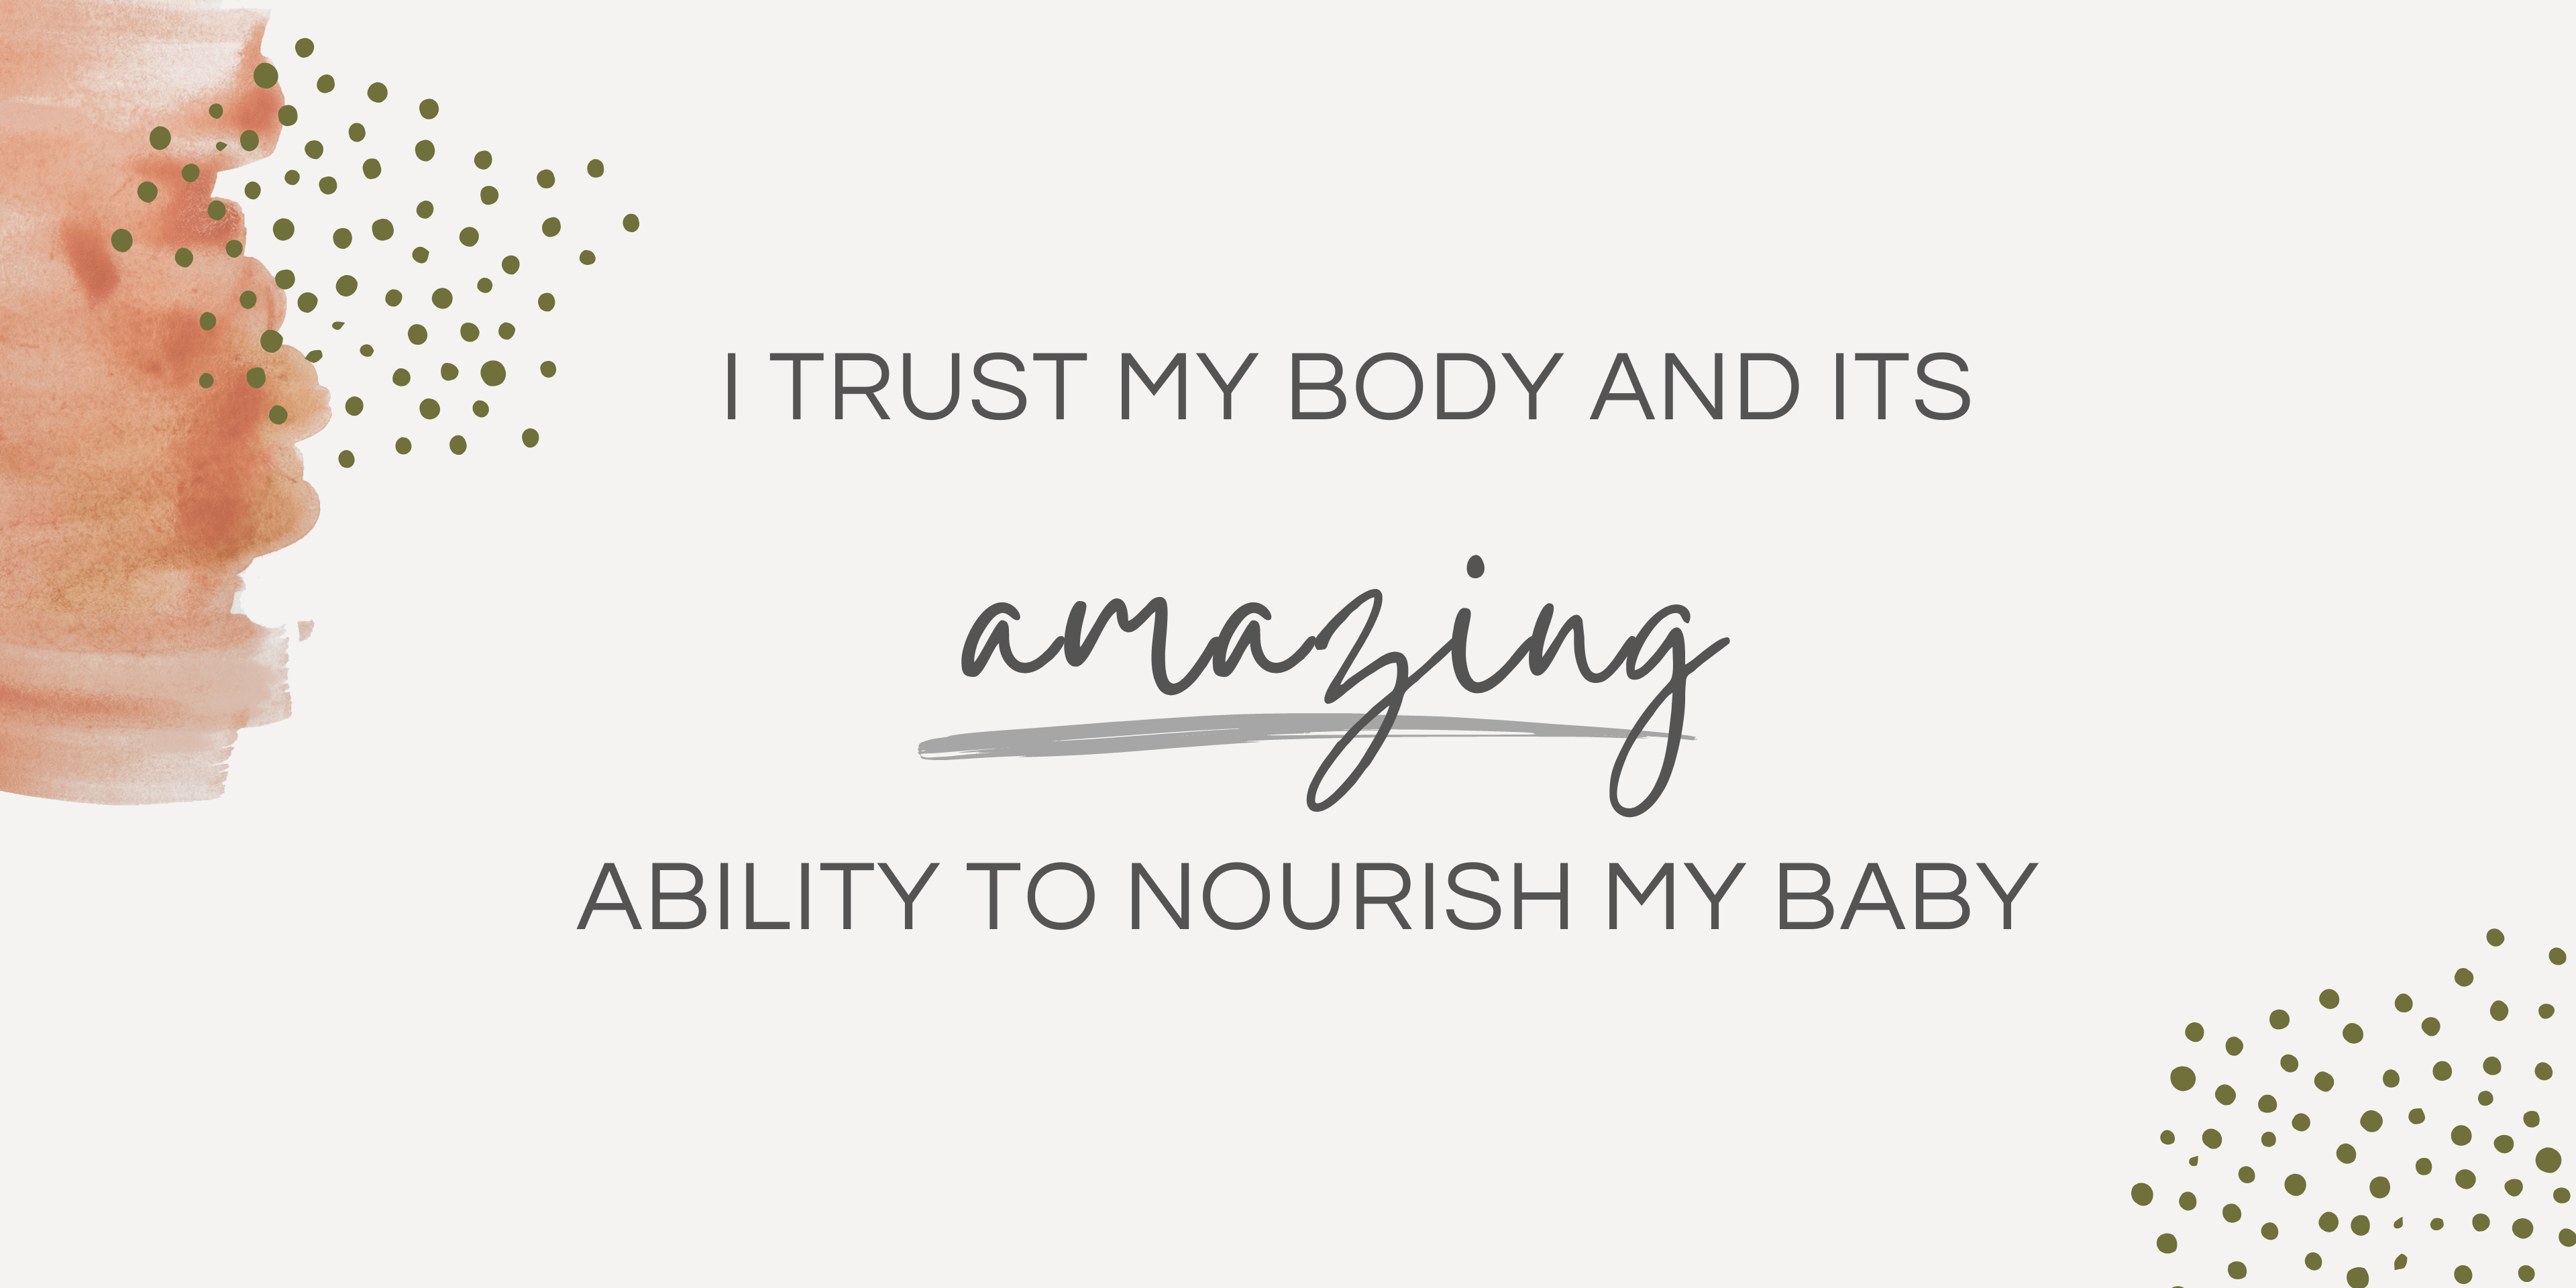 breastfeeding affirmations for mothers